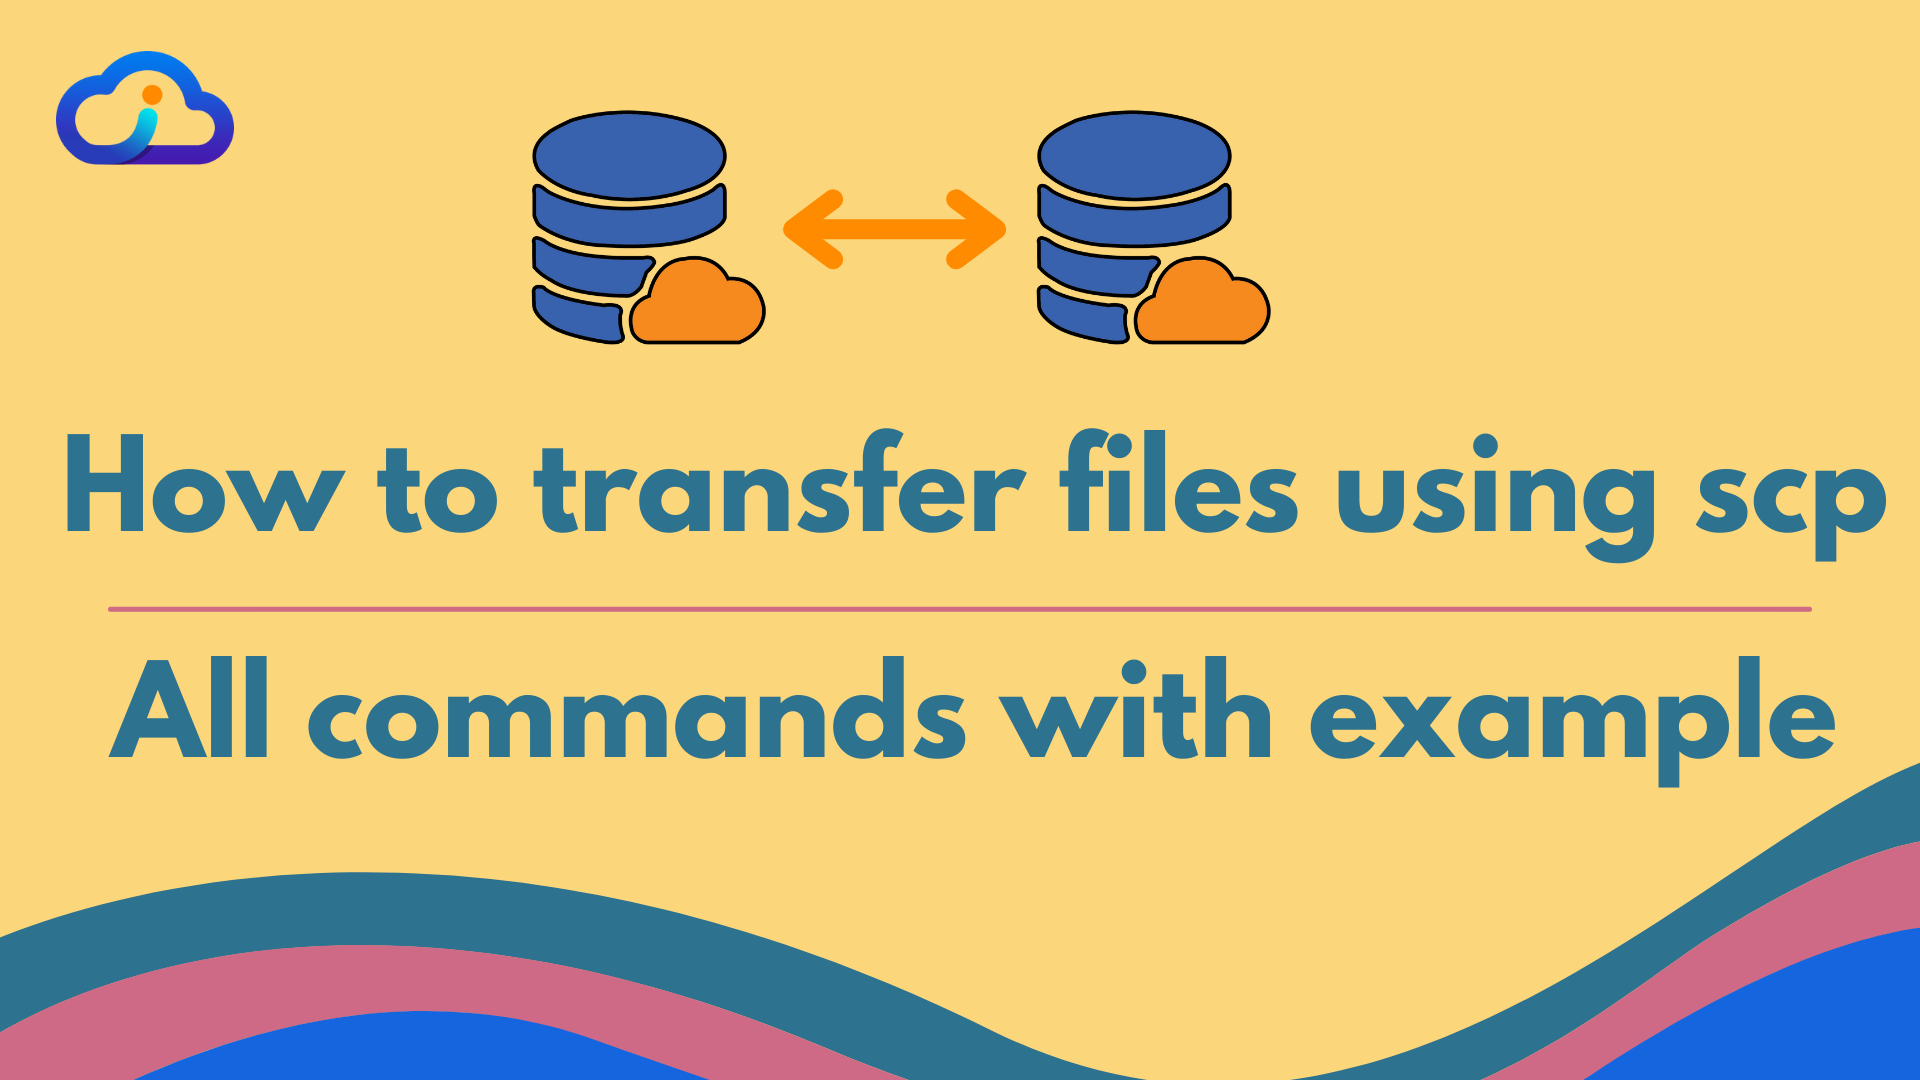 how to transfer files using scp - all commands with example